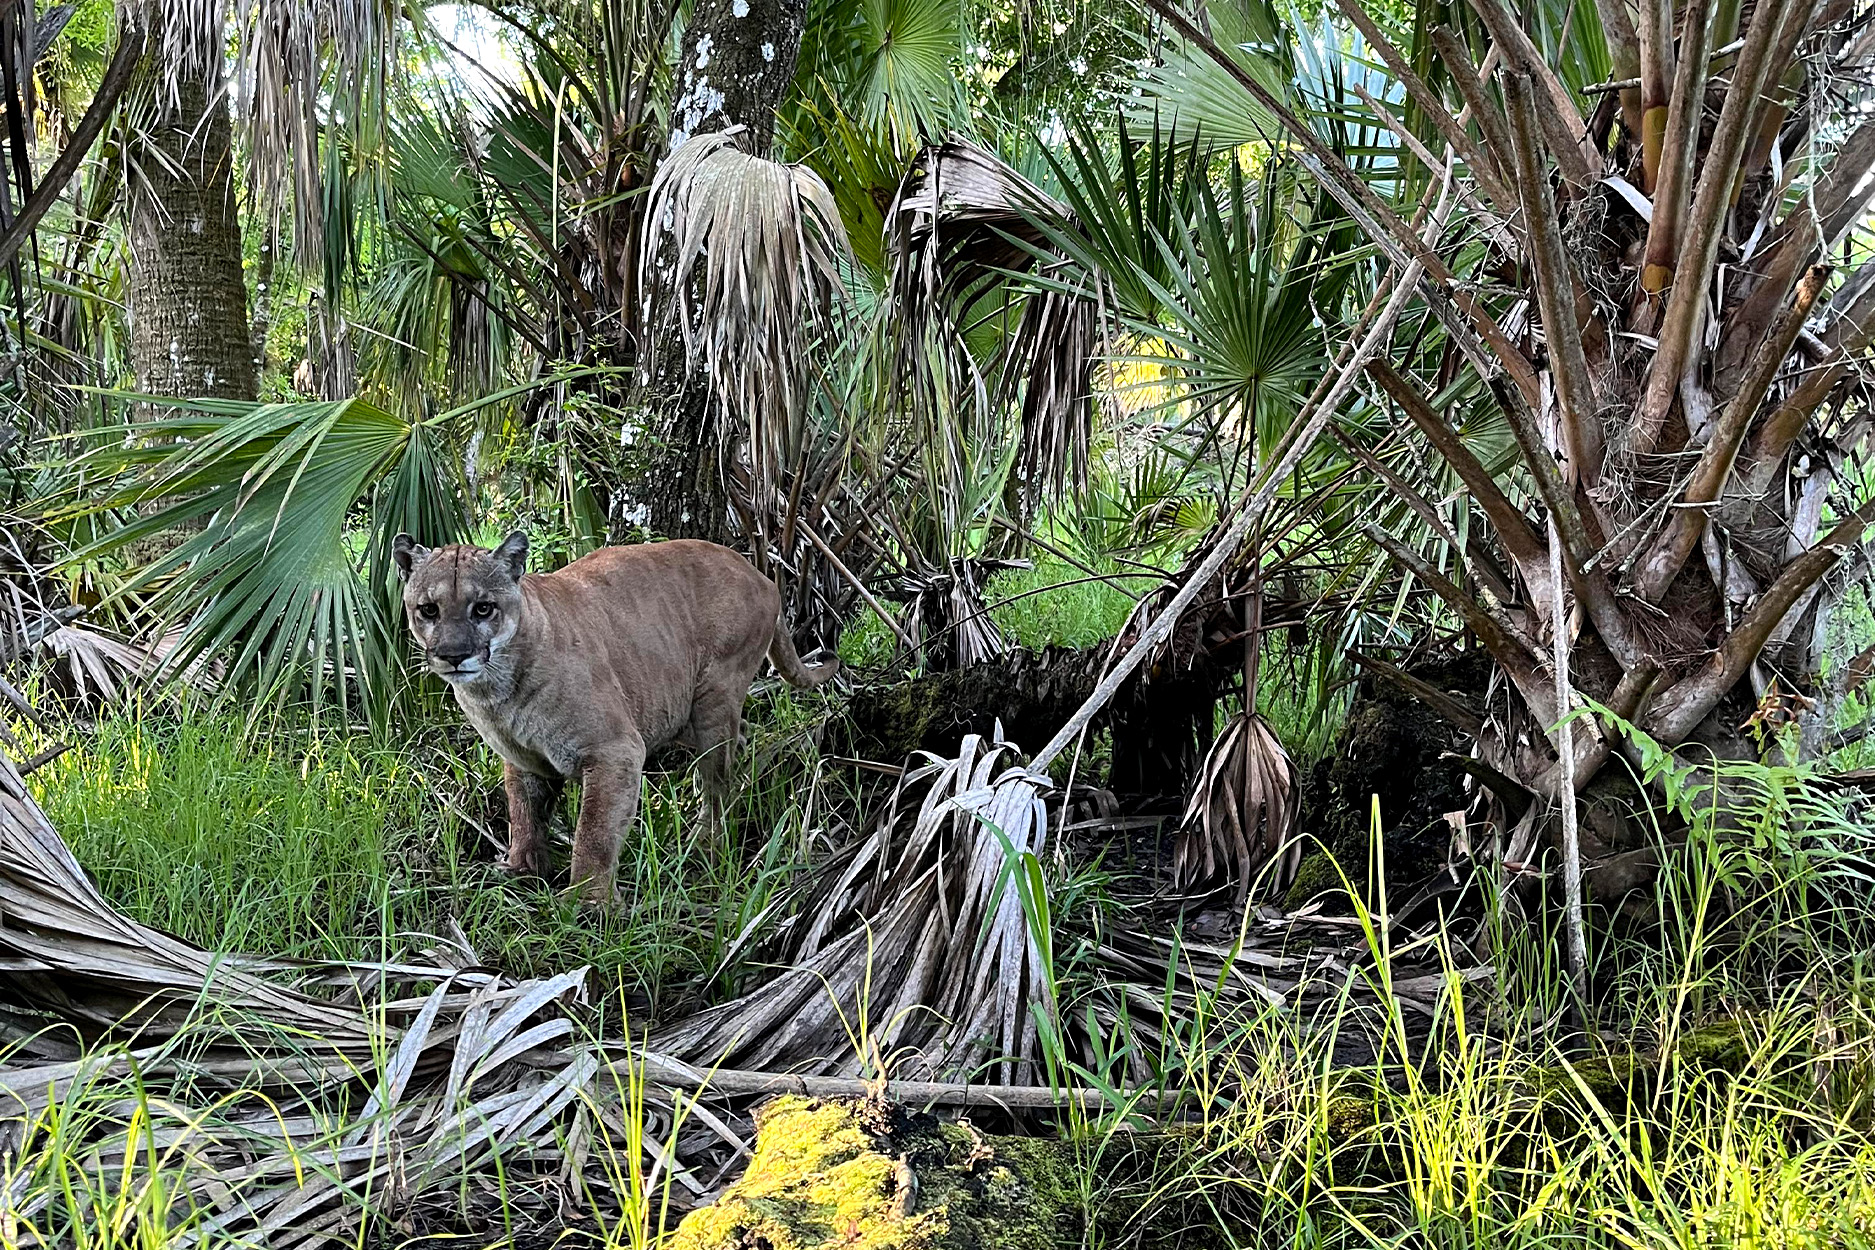 A Florida panther that was spotted in southwest Florida on Monday.